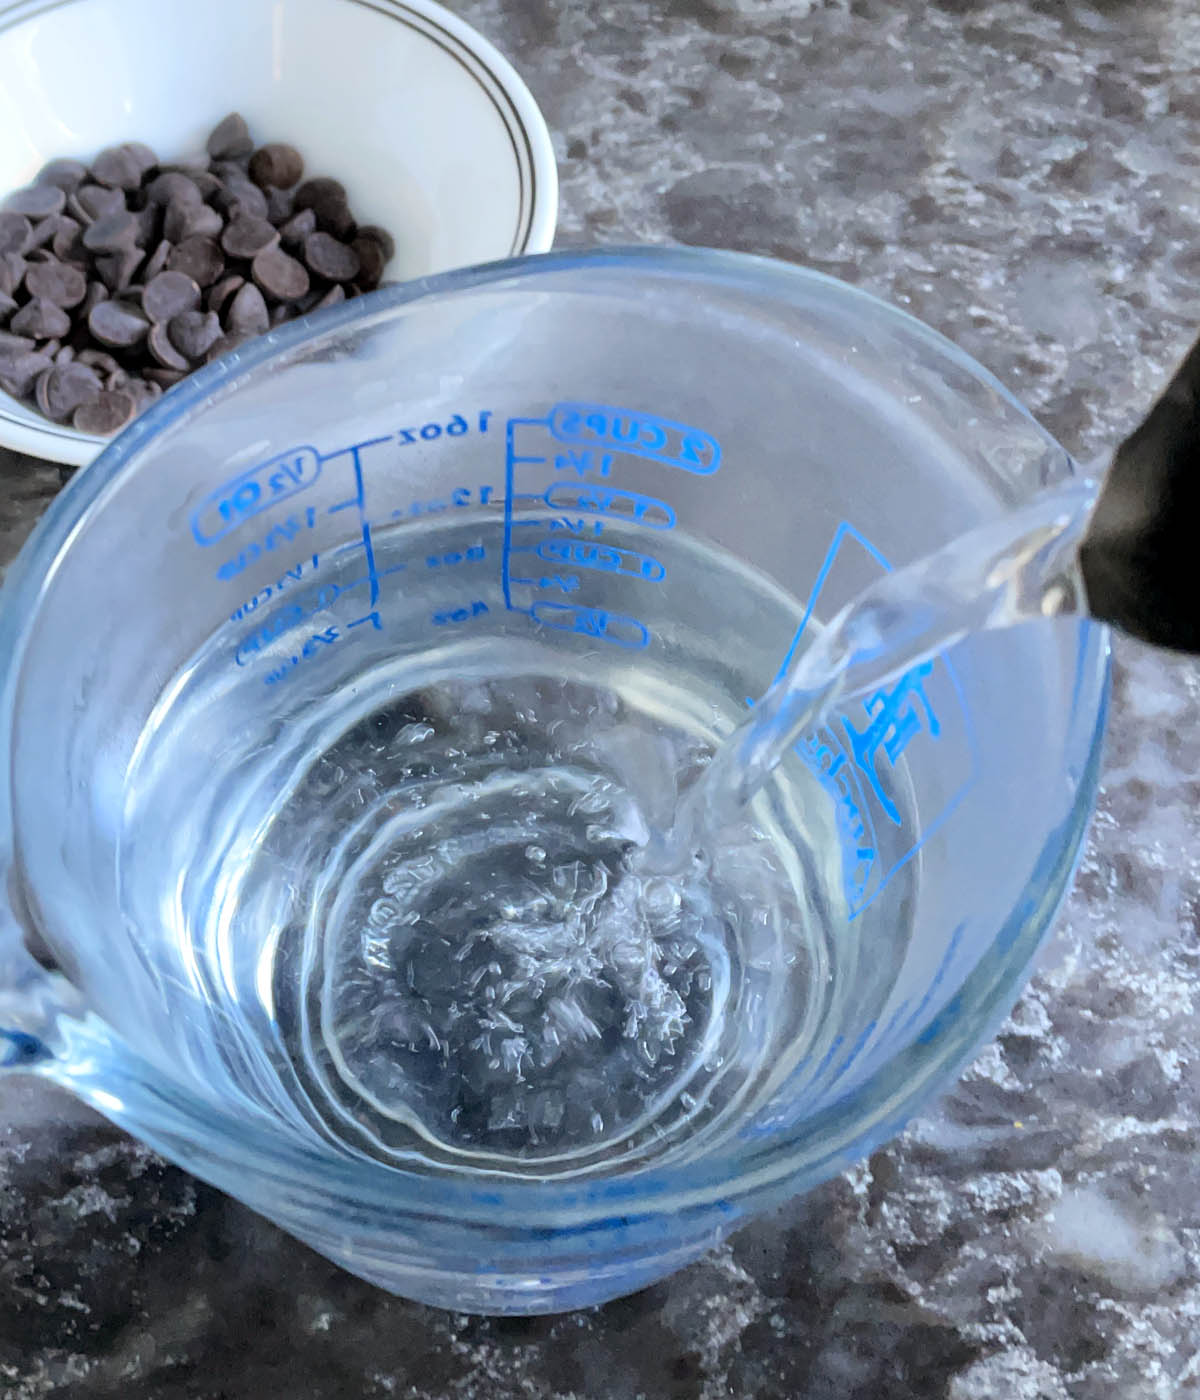 Hot water being poured from a kettle into a glass measuring cup.